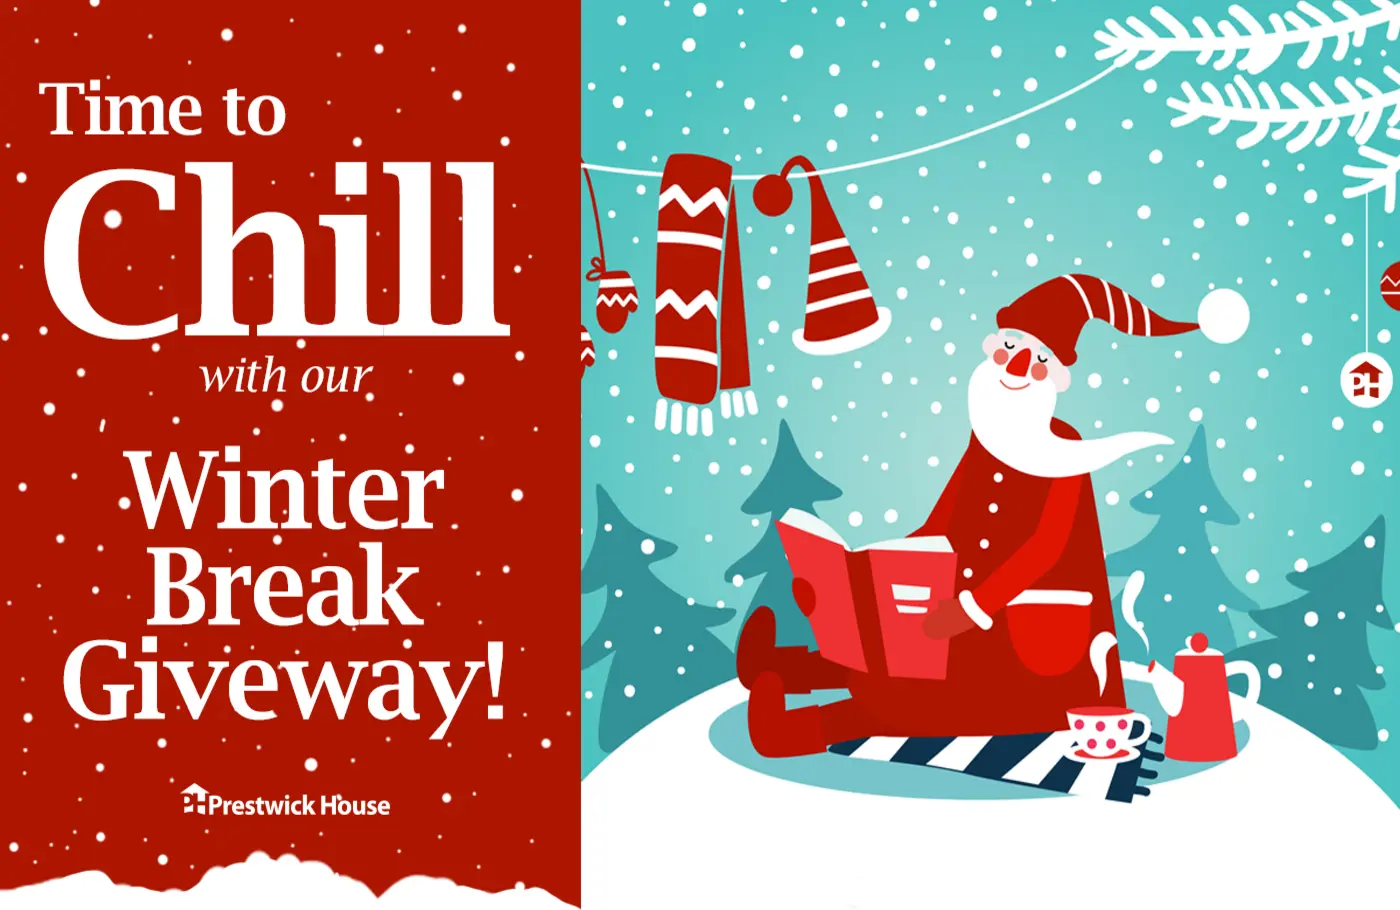 ELA teachers, it’s time to take it easy! Enter our Winter Break Giveaway for your chance to win a seasonal prize package filled with fun goodies!